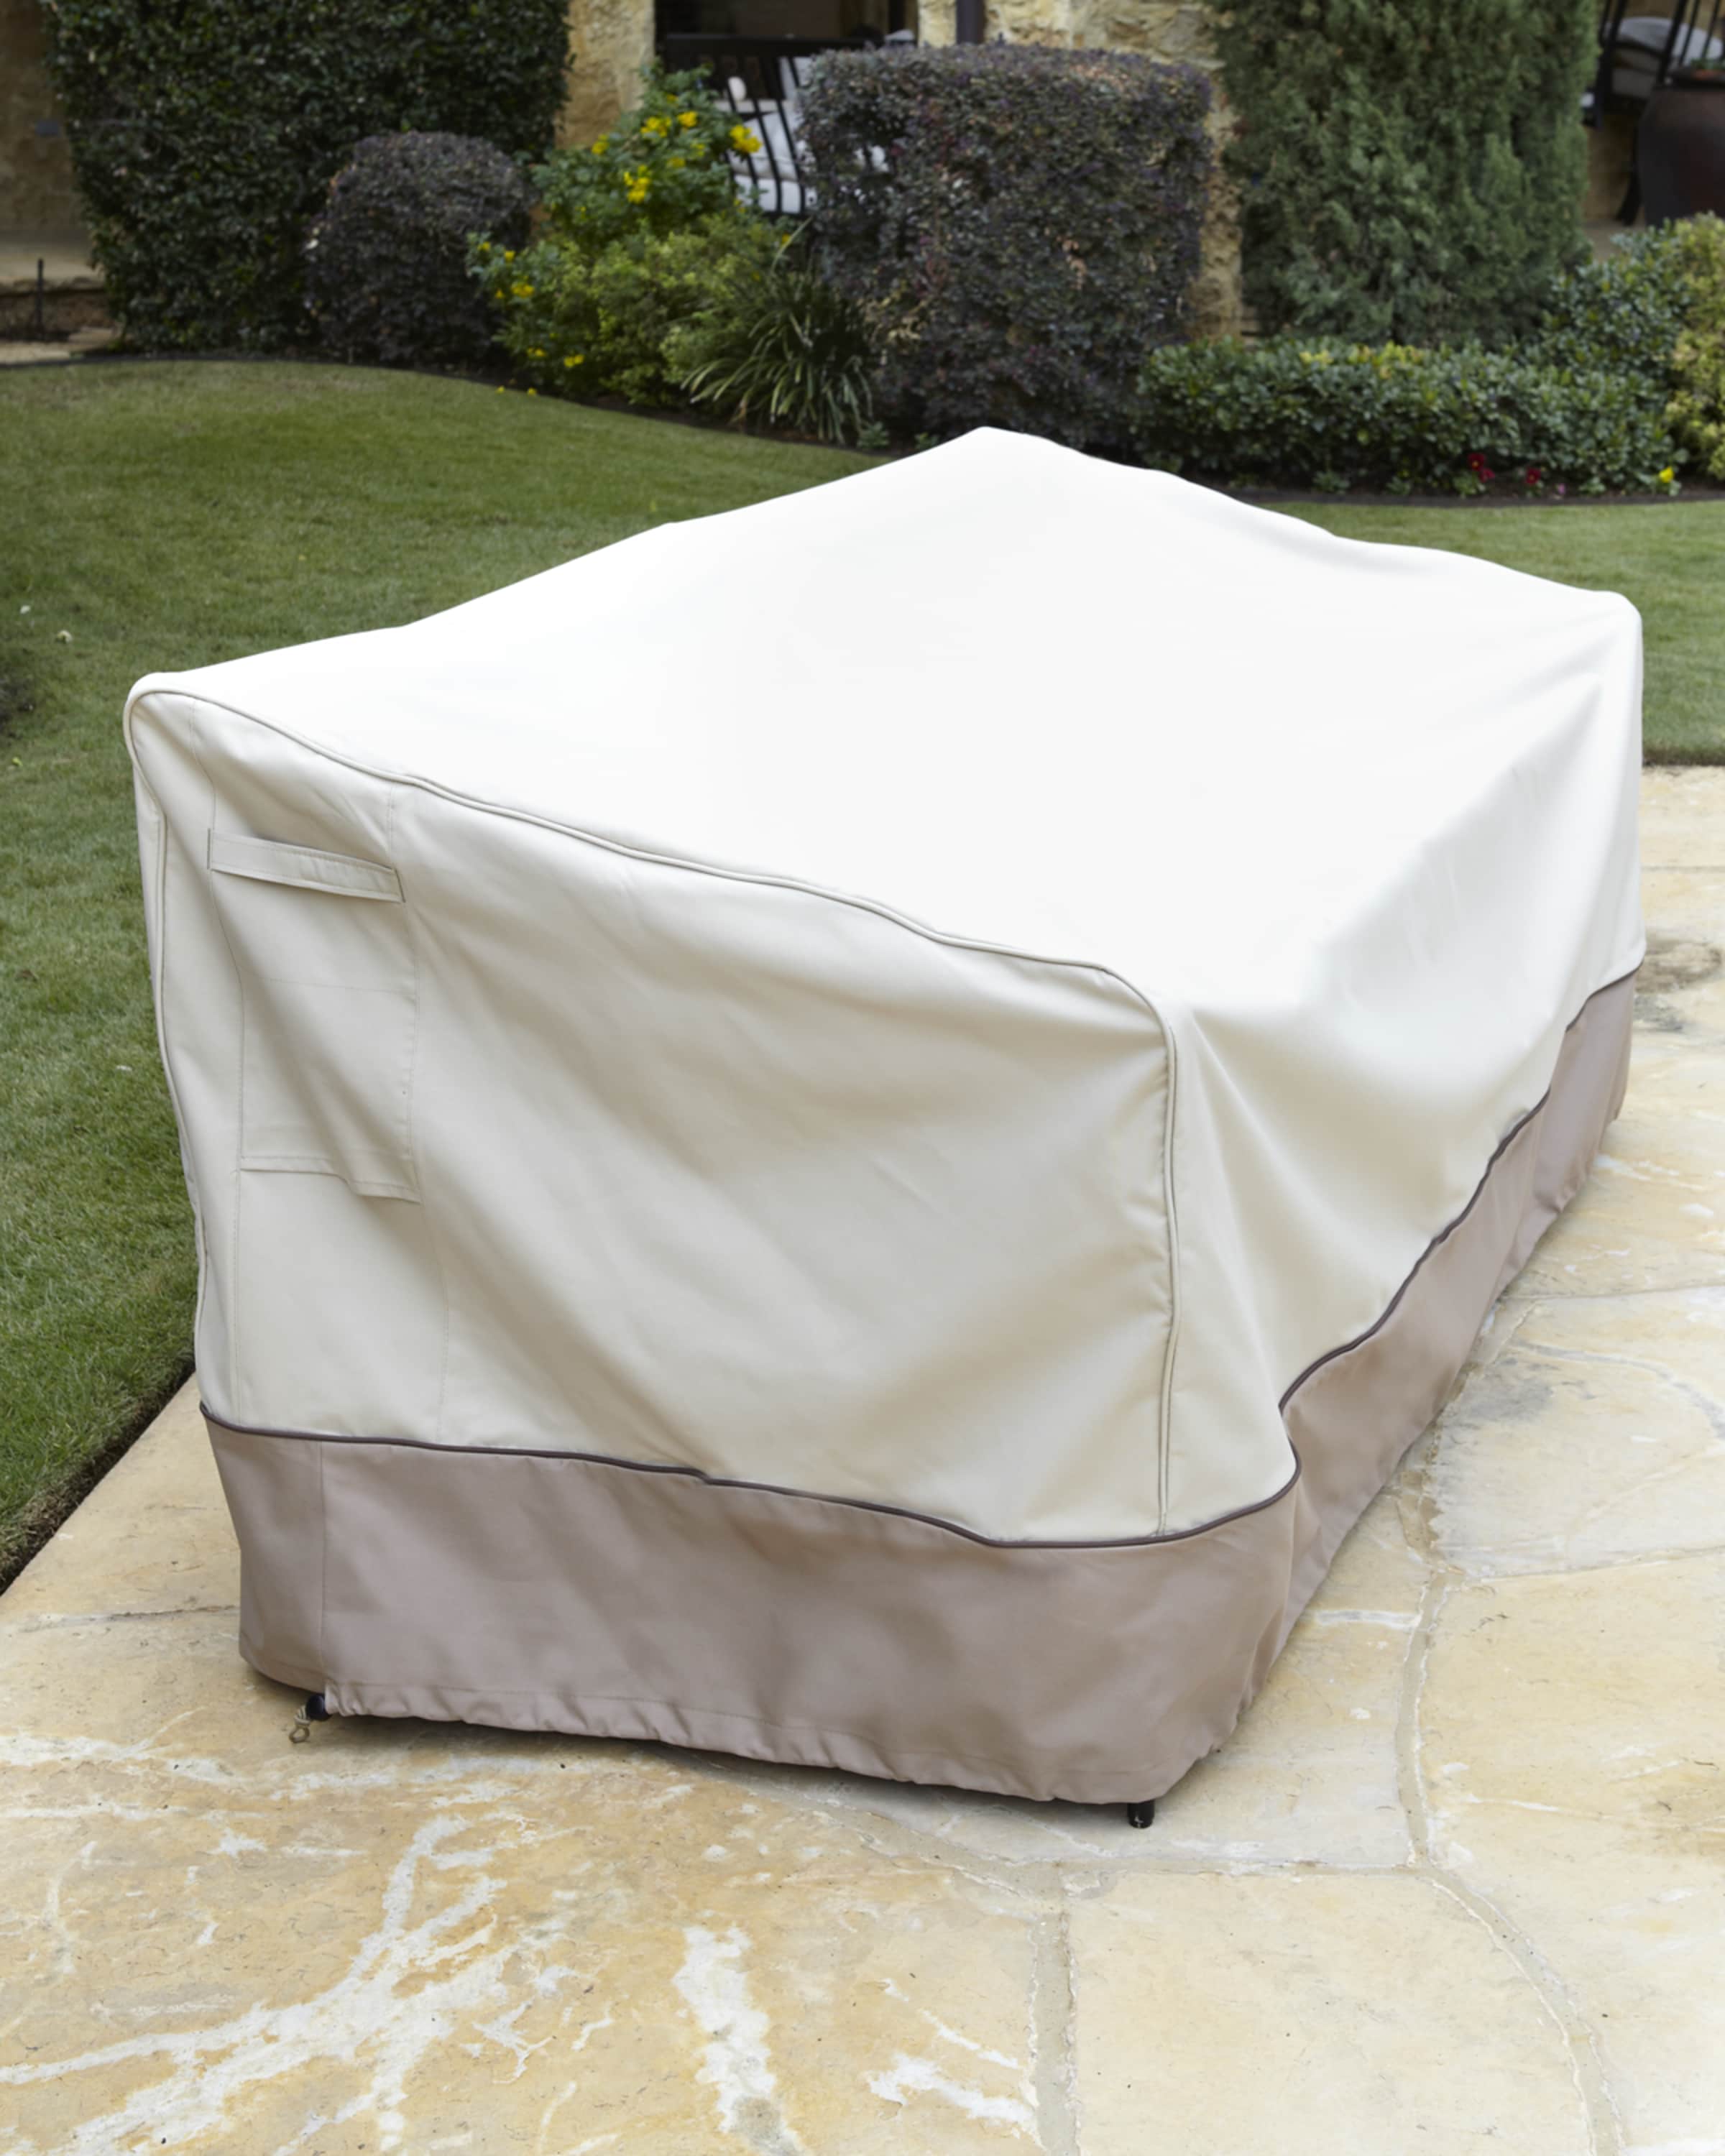 Outdoor Loveseat Cover